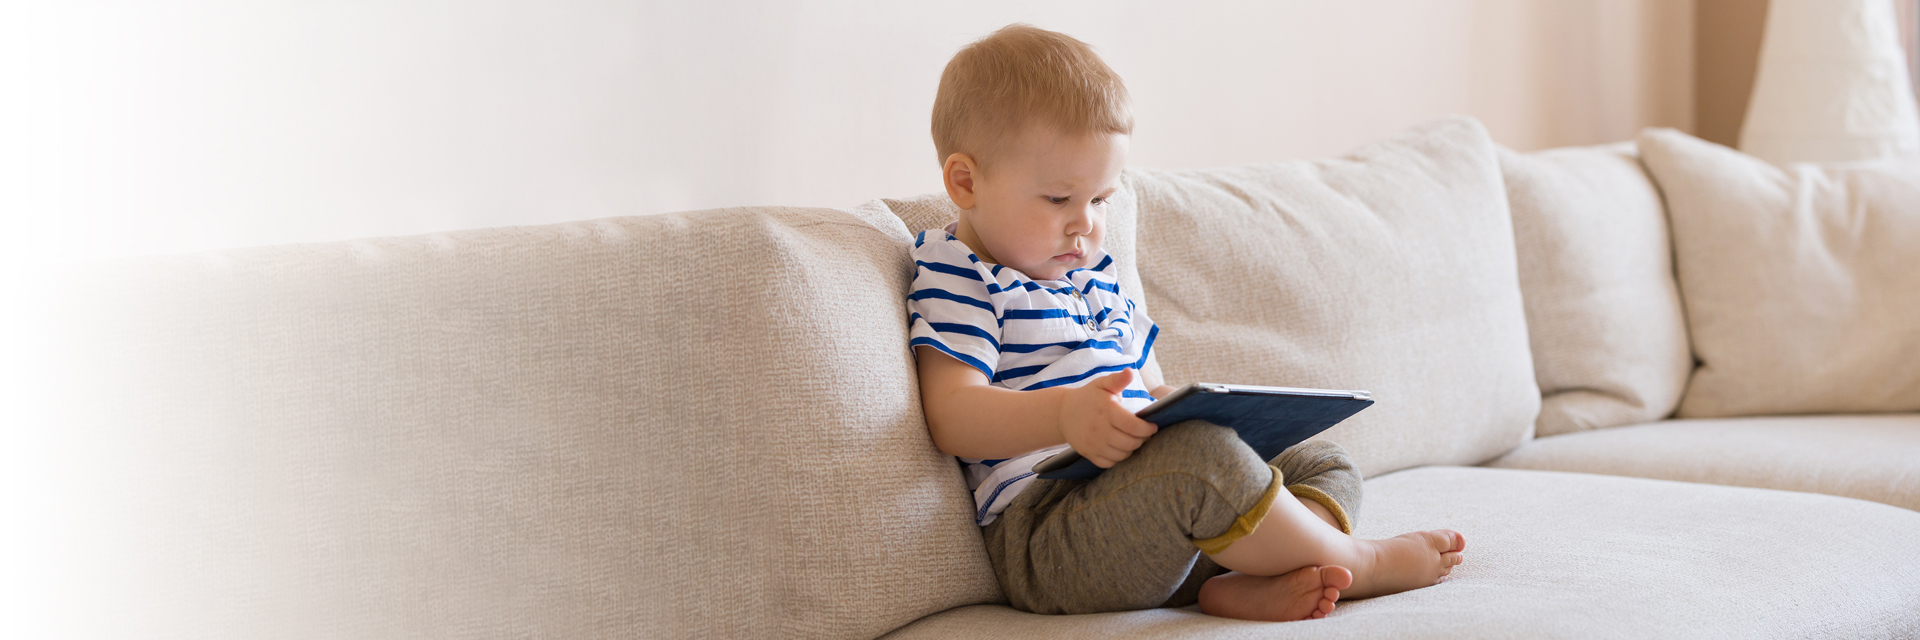 Little boy reading on couch